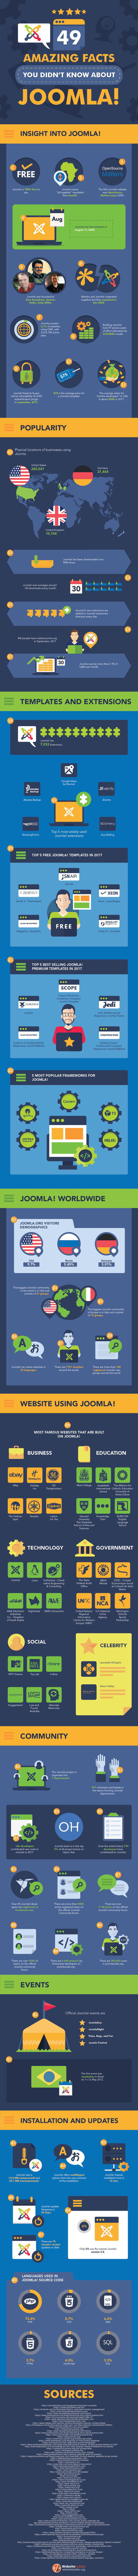 Infographic - 49 Amazing Facts You Didn't Know About Joomla!